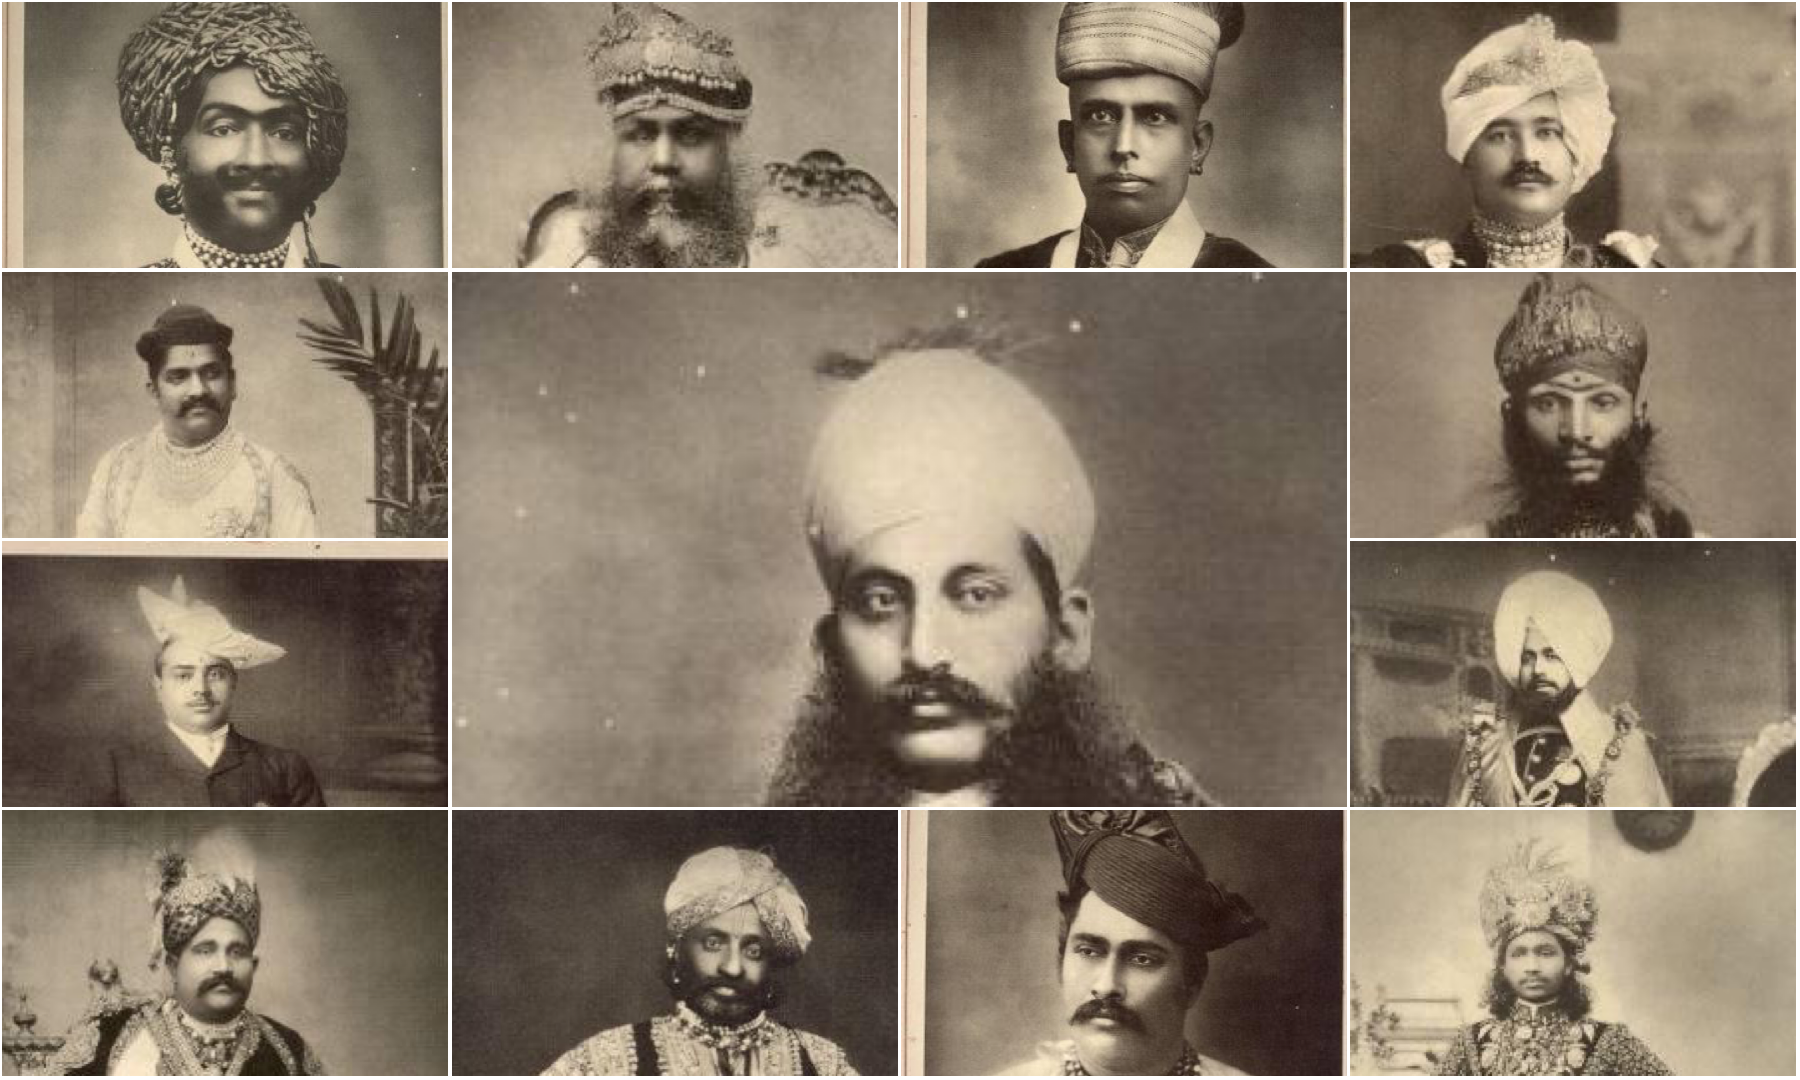 Portrait of Rulers of The Indian Princely States by Raja Deen Dayal